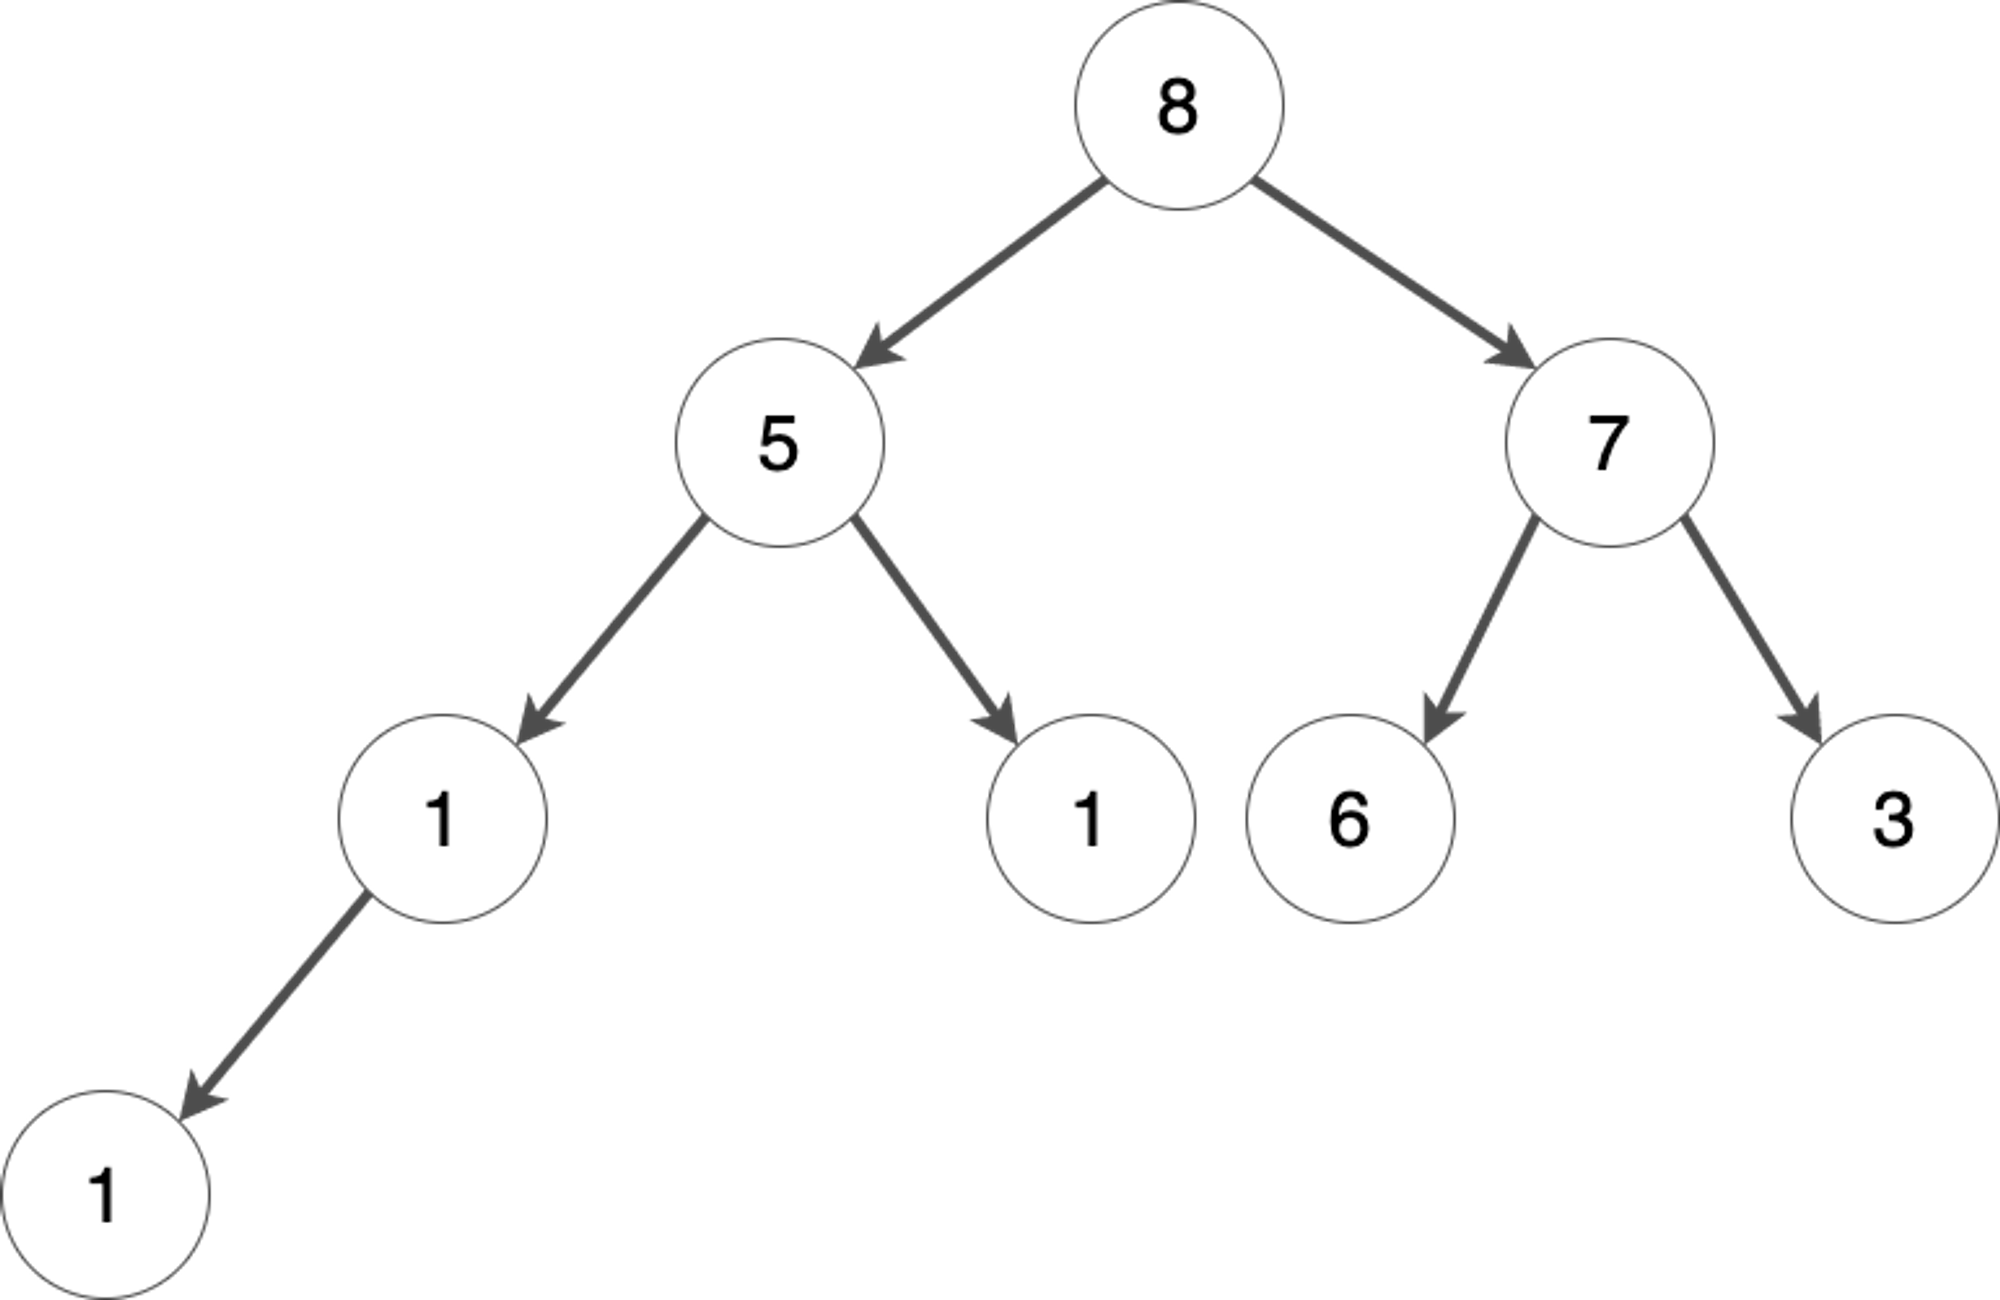 An example of a max-heap with 8 nodes